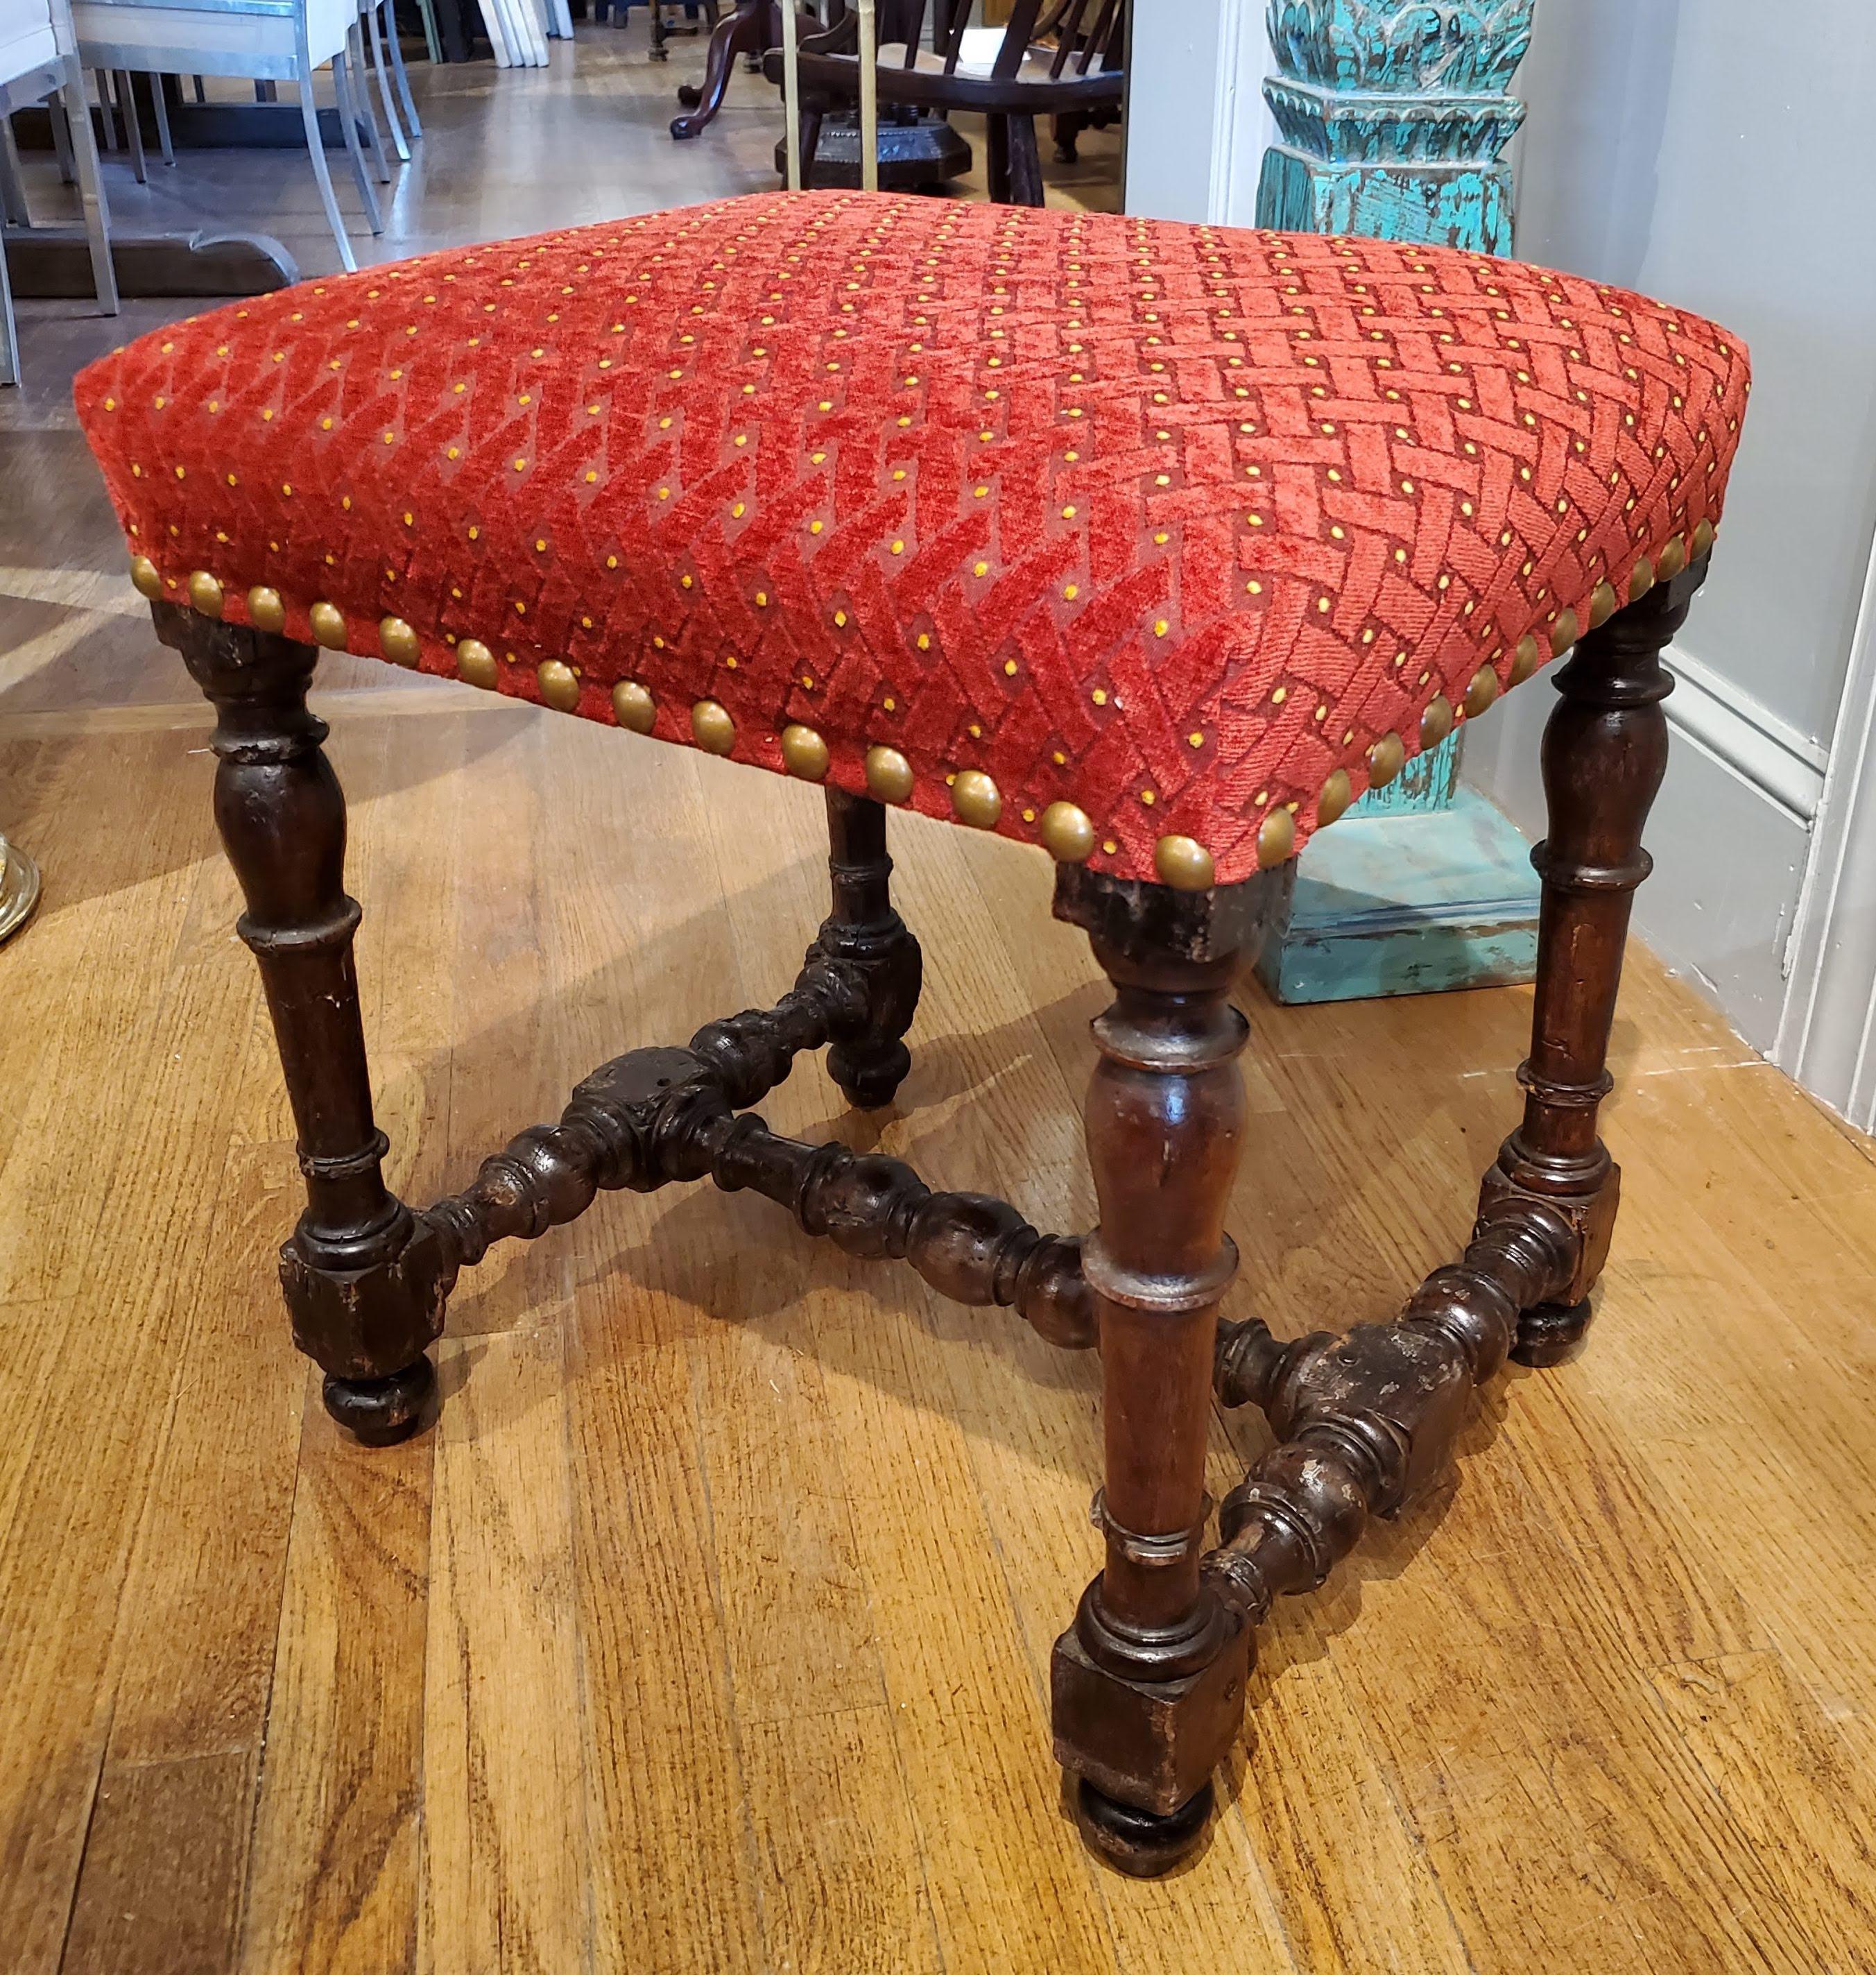 This small mid-17th century Louis XIV stool will be a beautiful additional to your sitting room. Made of deeply patinated walnut with turned legs and stretchers. Recently reupholstered in a stunning textured red chenille that has gold accent dots.